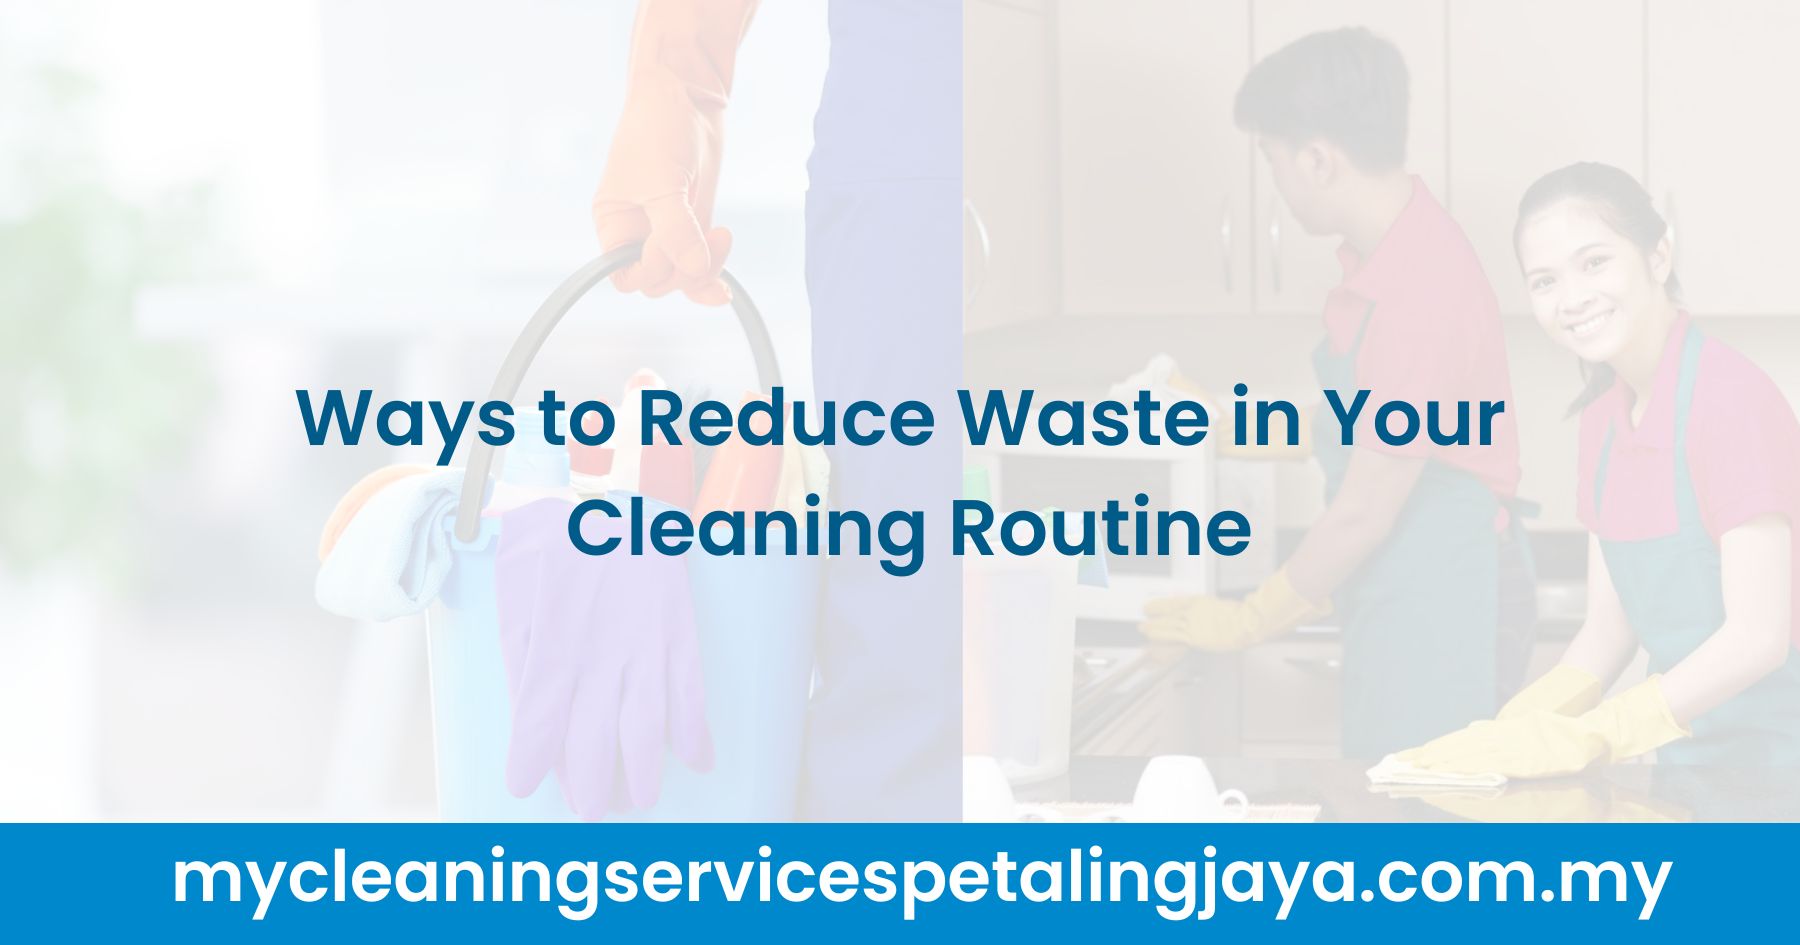 Ways to Reduce Waste in Your Cleaning Routine